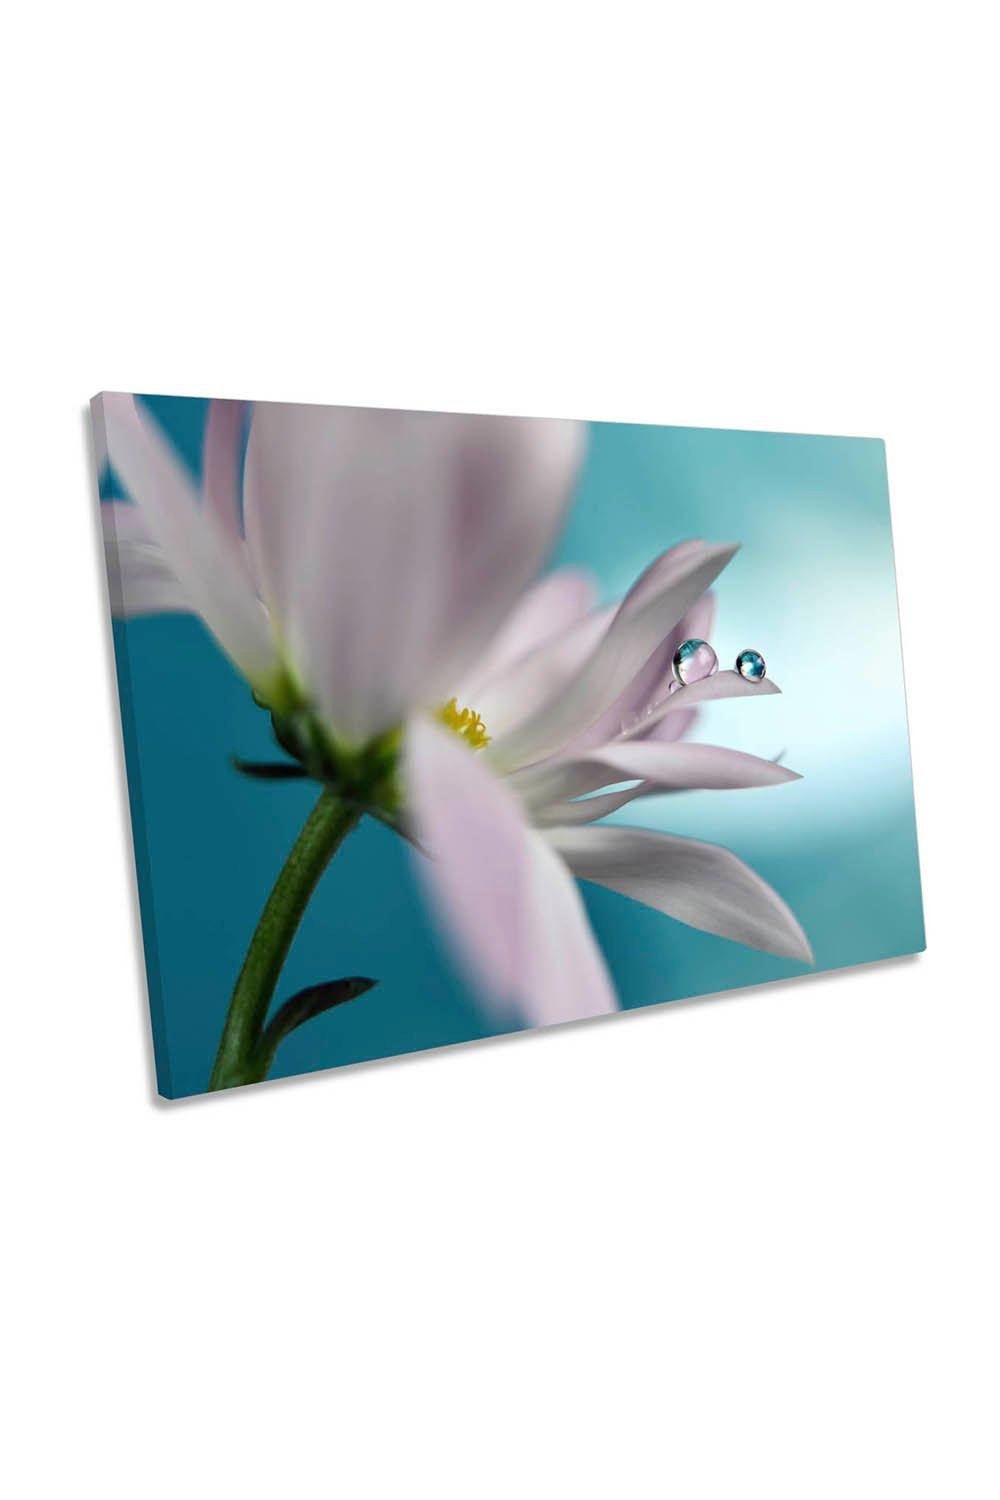 In Turquoise Company Flower Floral Canvas Wall Art Picture Print